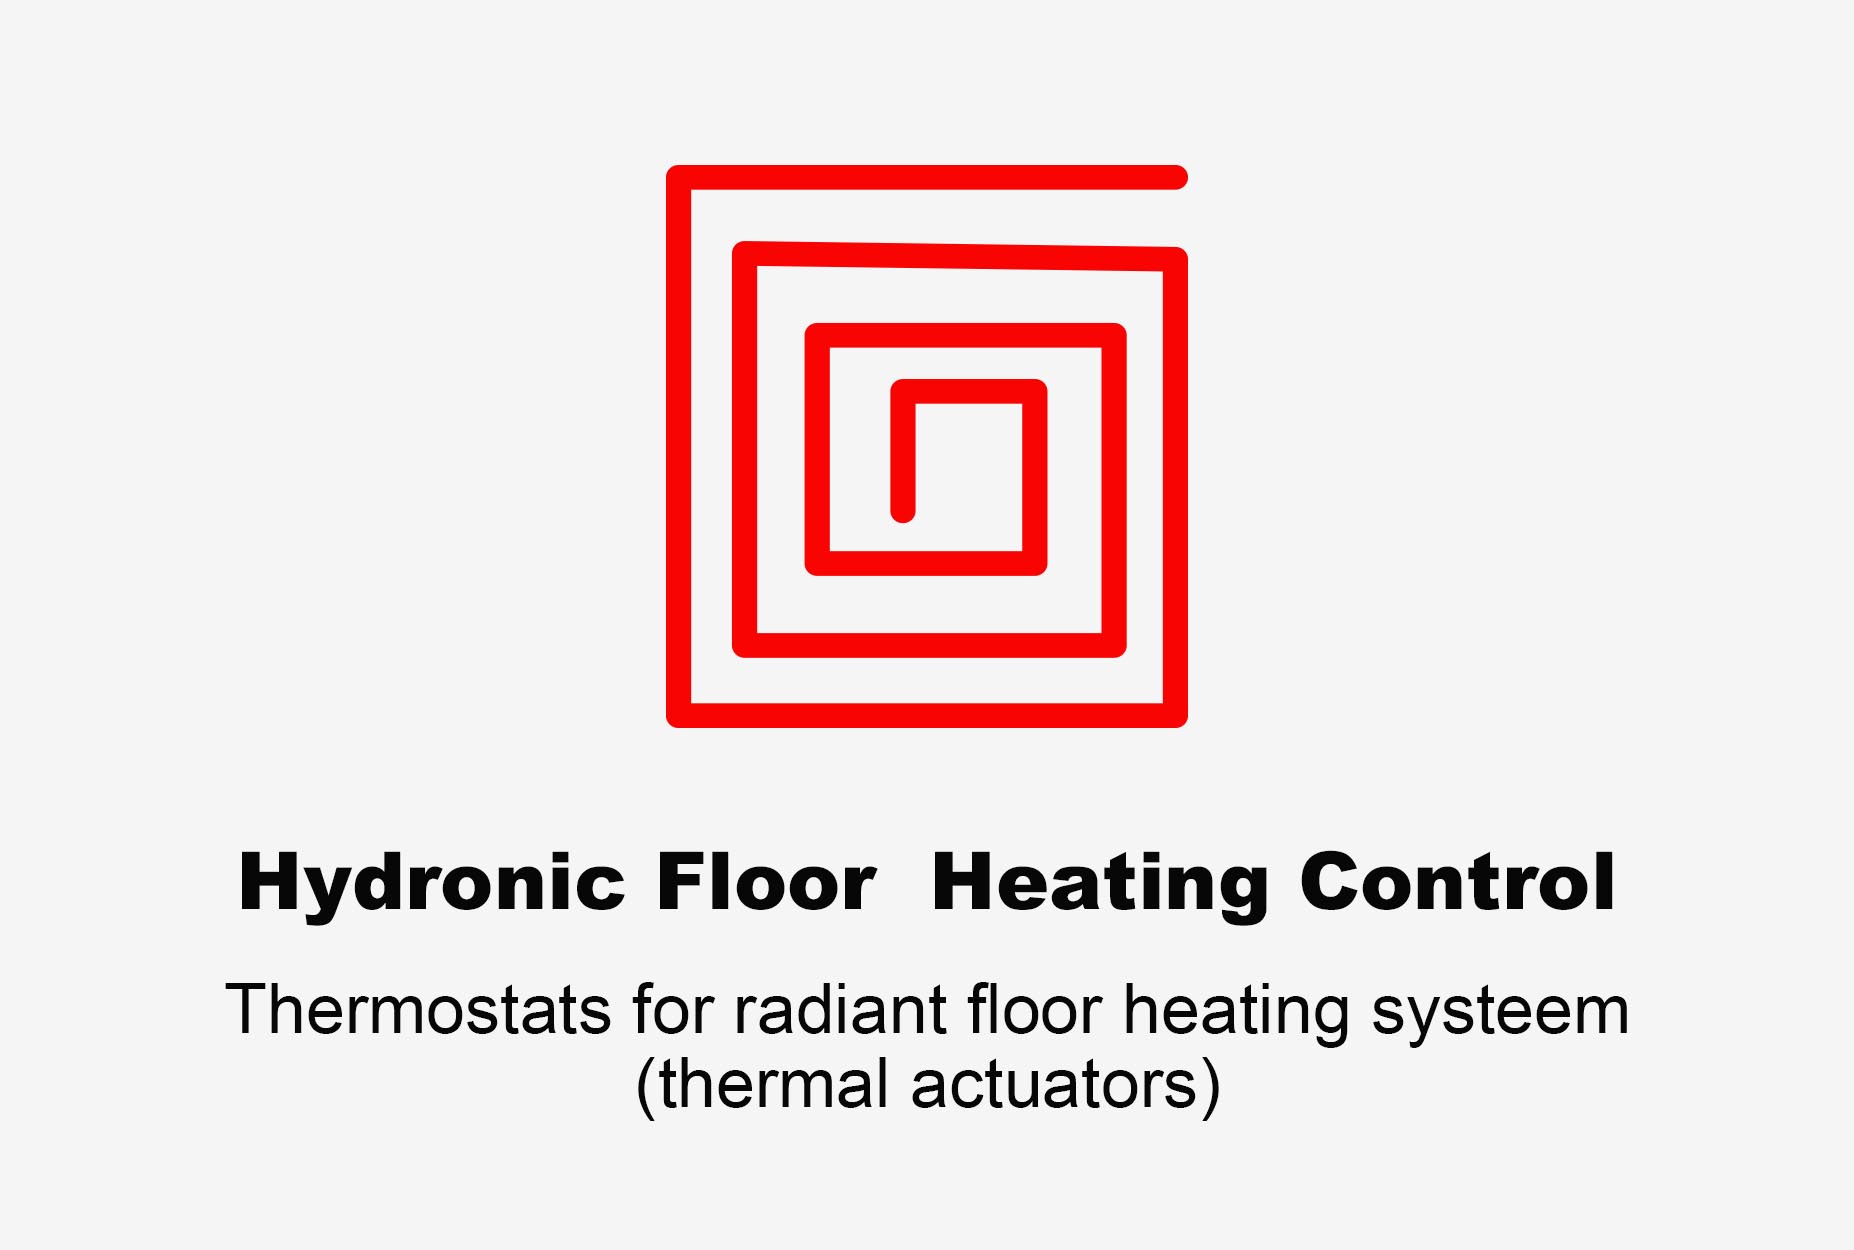 Hydronic Verwarming Thermostaat, vloerverwarming thermostaat, verwarming en koeling thermostaat, zigbee thermostaat, wifi thermostaat, alexa thermostaat, google home thermostaat